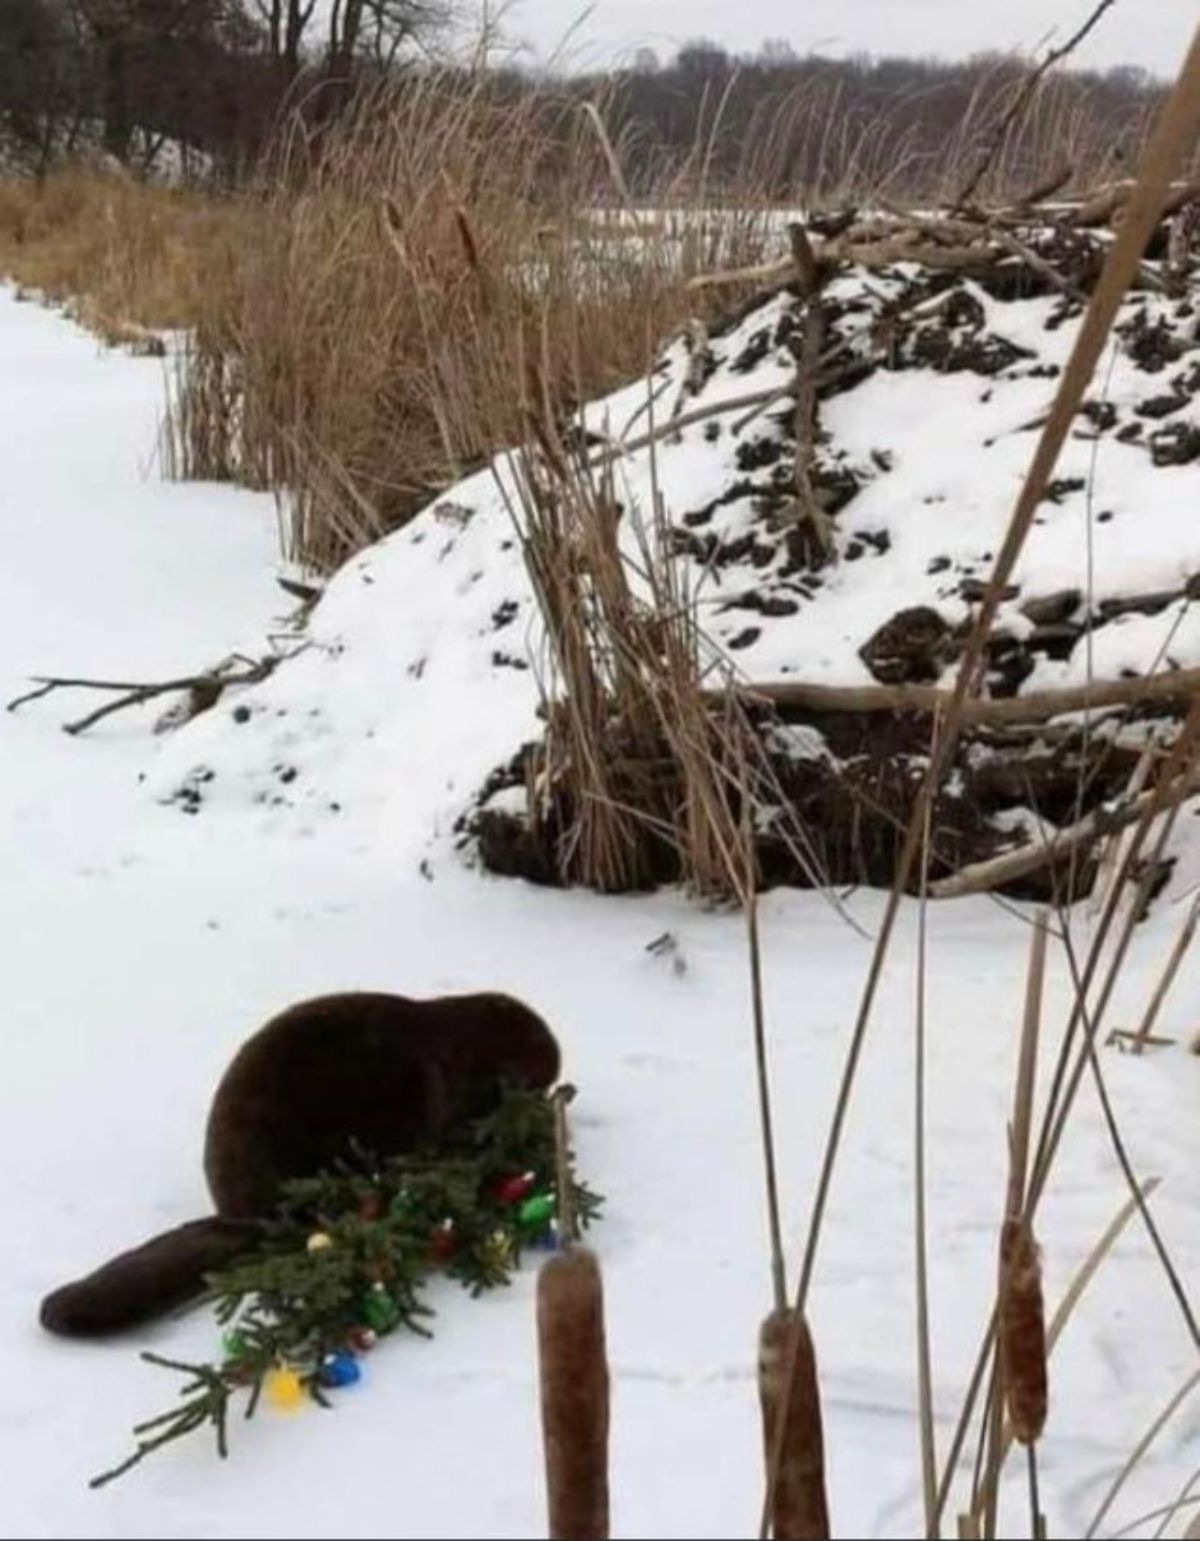 beaver sitting outside in the snow with a small christmas tree laying on its side